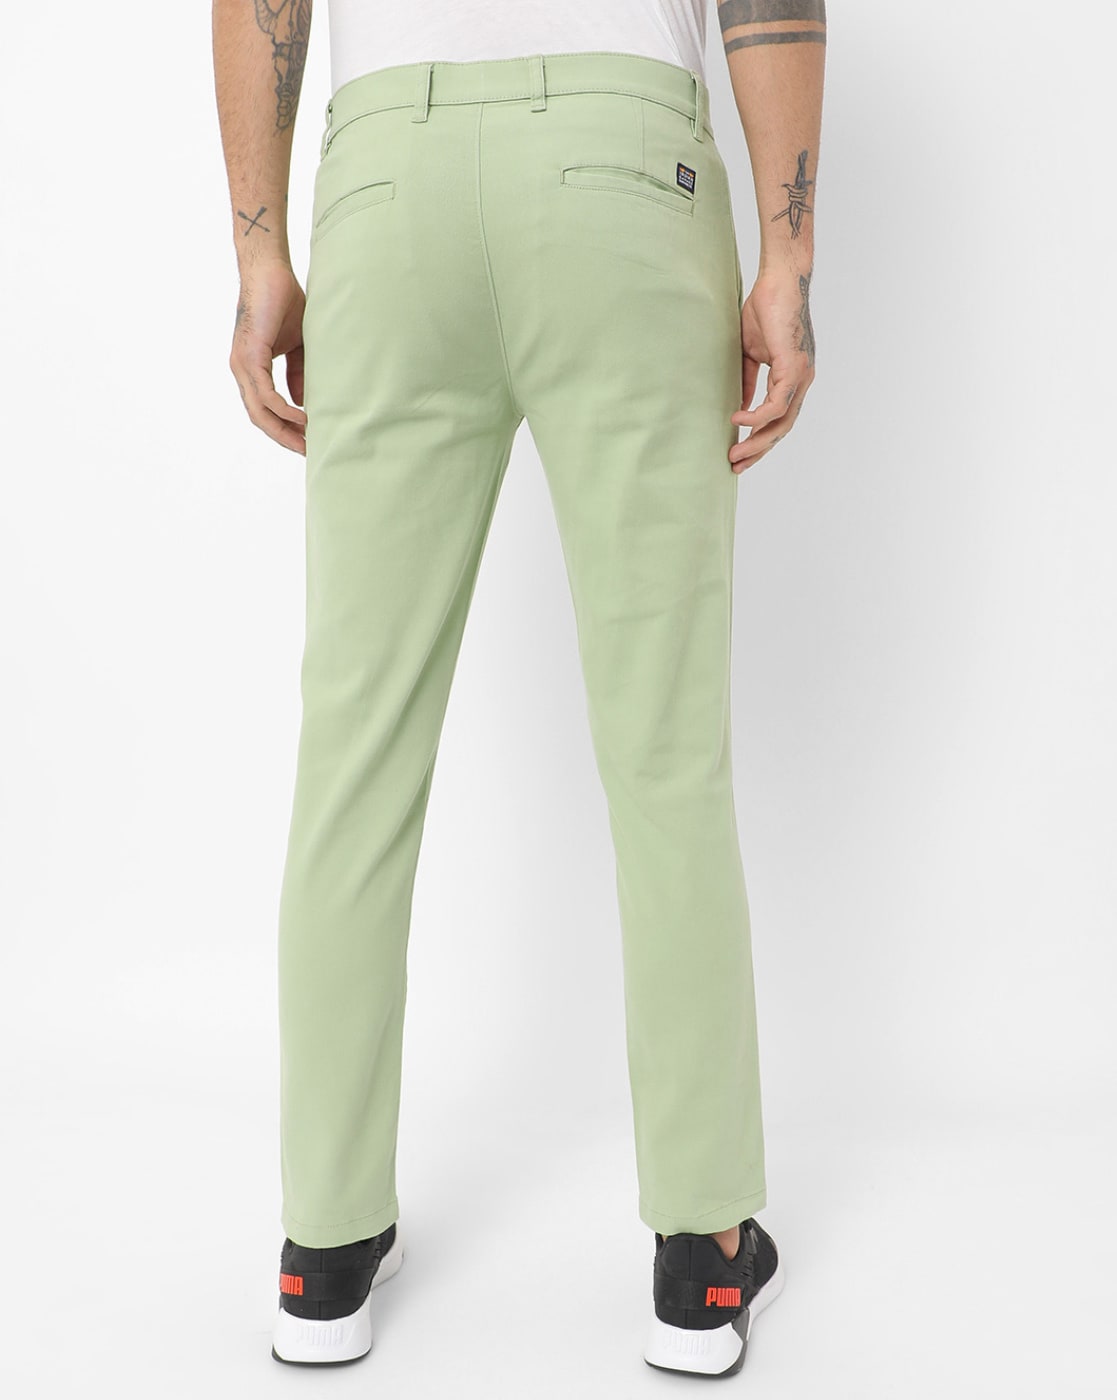 53 Best Mens Green Pants Outfit Ideas for 2022  Next Luxury